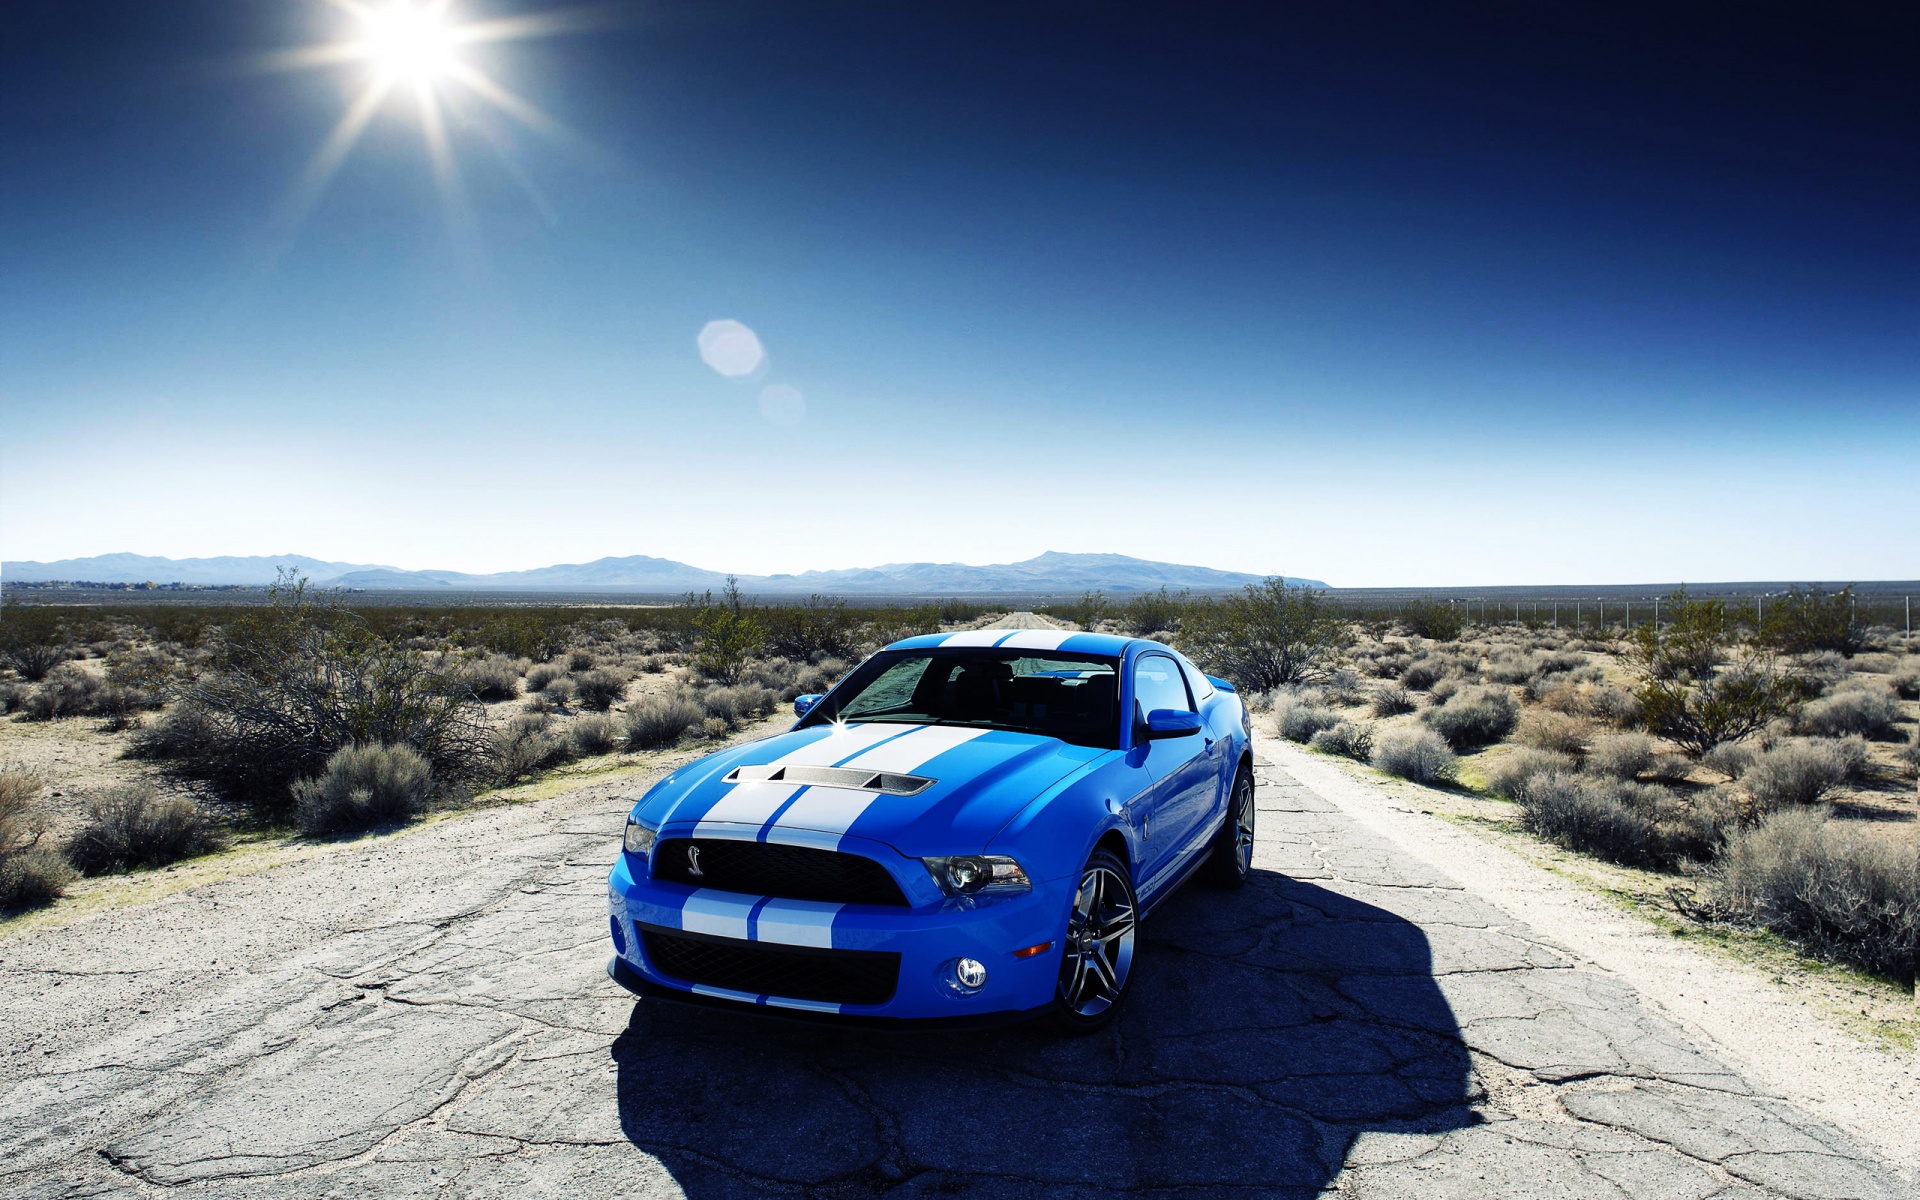 Ford Shelby Gt500 Car Wallpapers In Jpg Format For Free Download